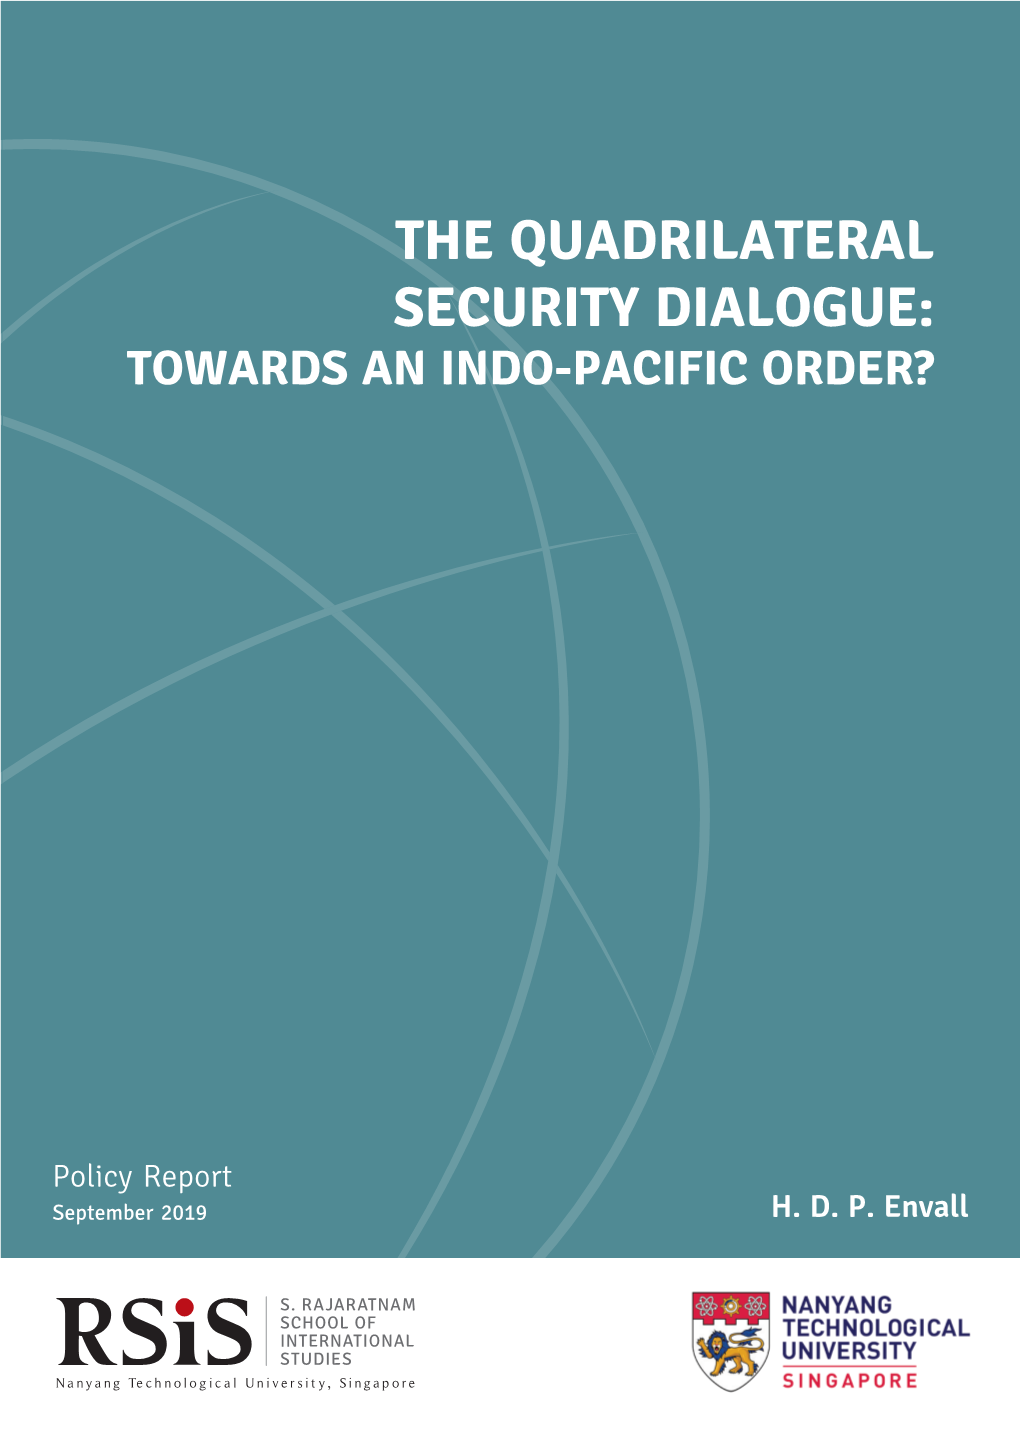 The Quadrilateral Security Dialogue: Towards an Indo-Pacific Order?